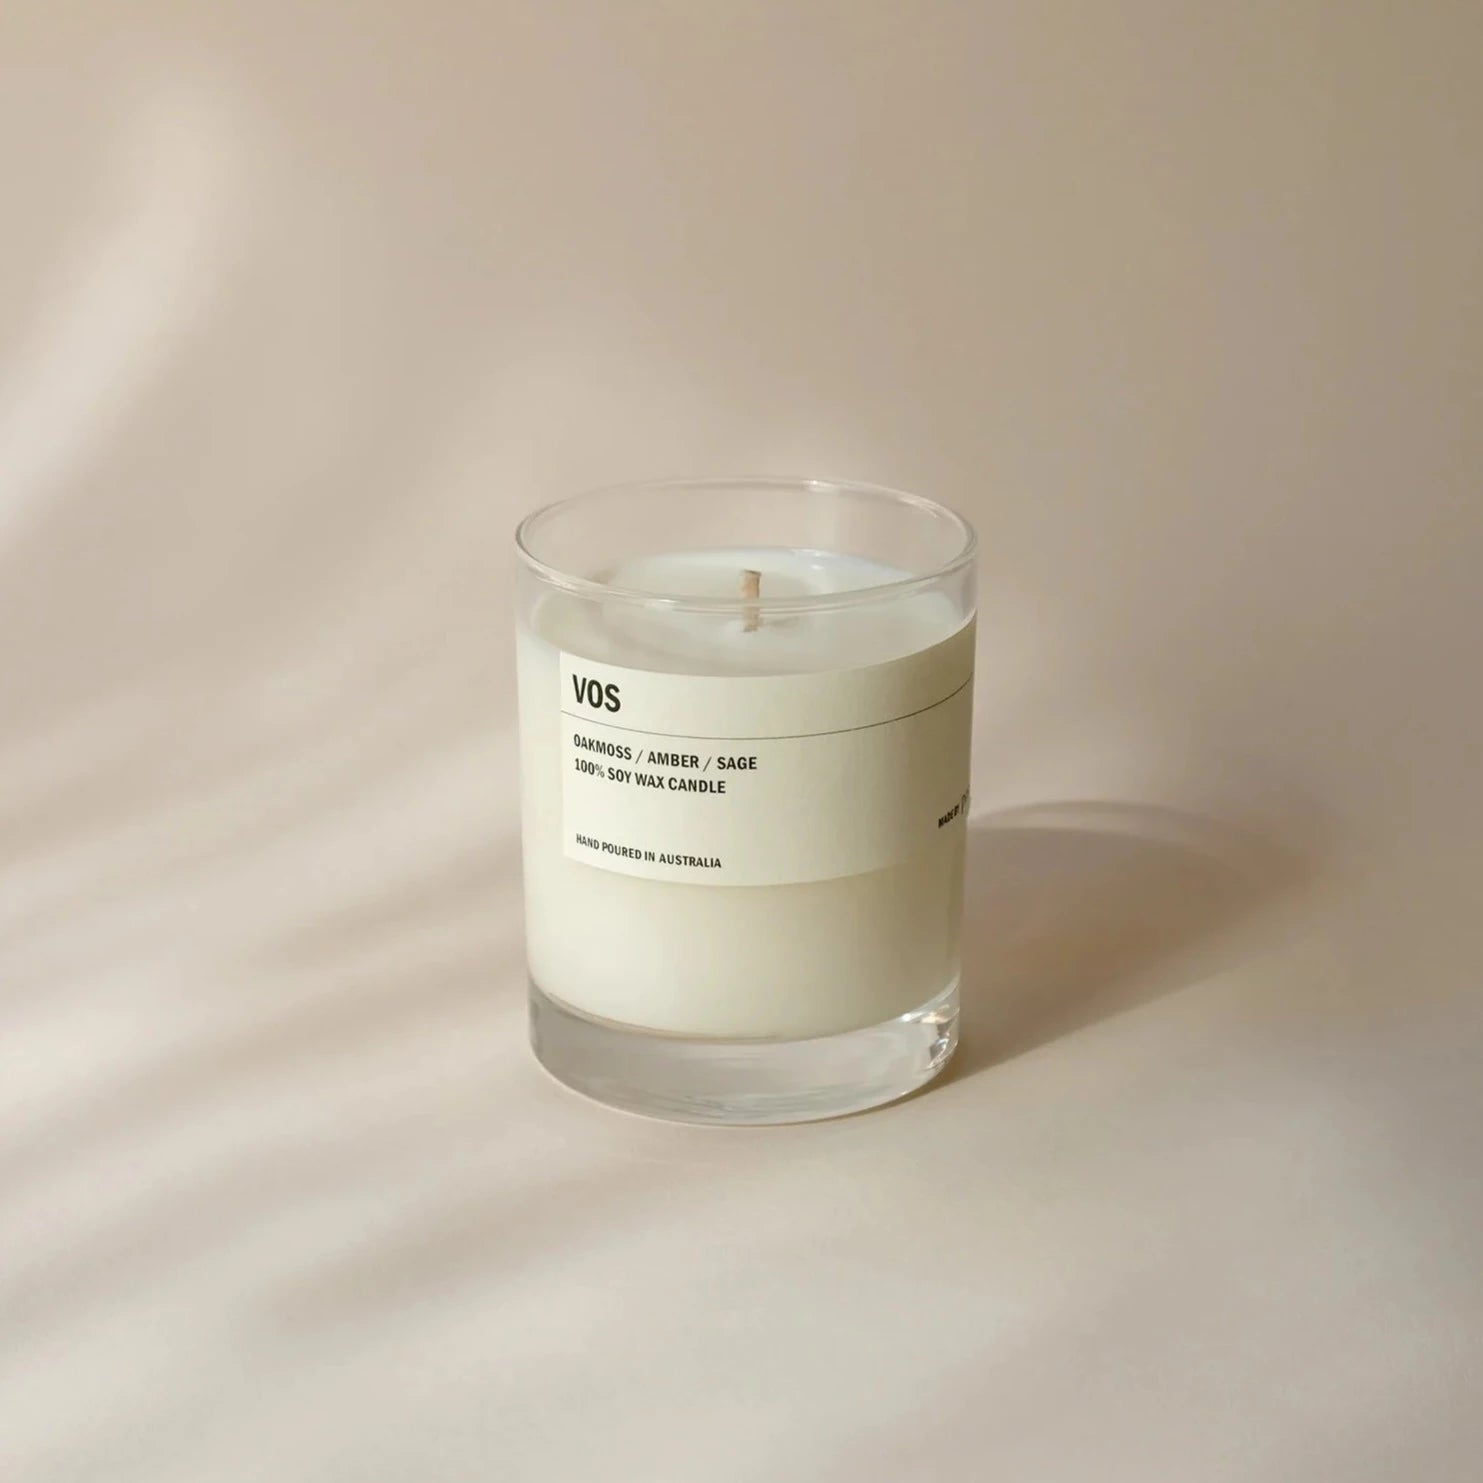 VOS Soy Wax Candle by Posie